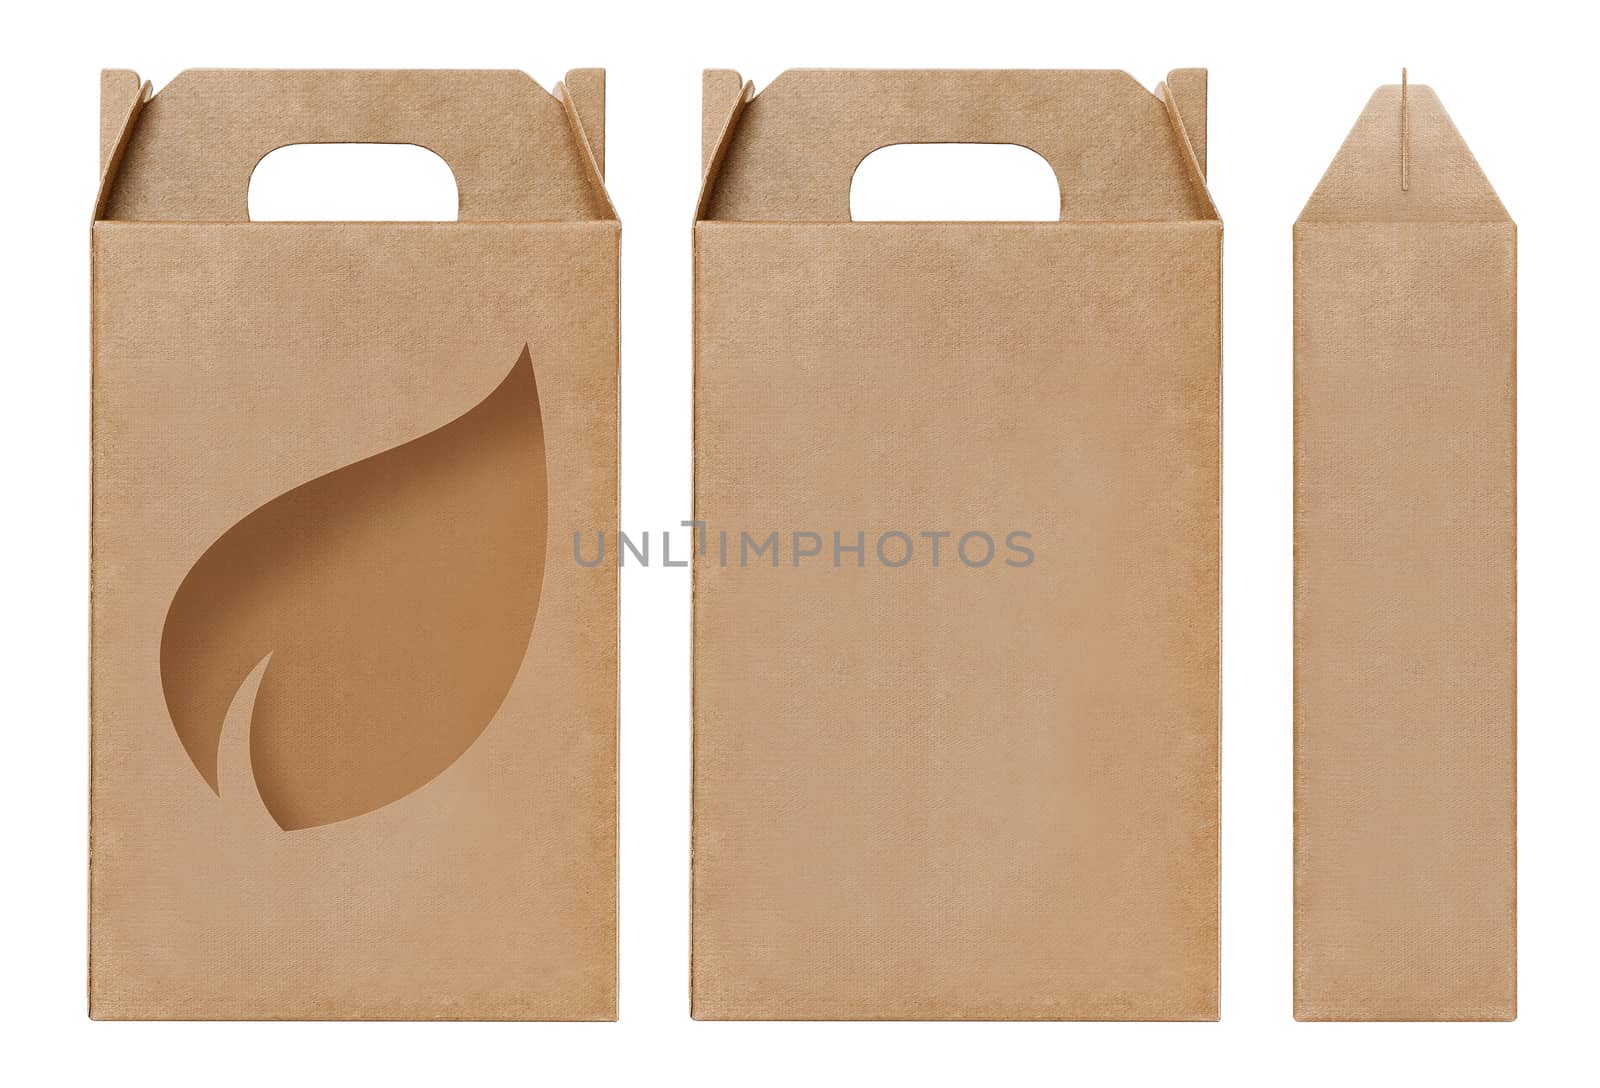 Box brown window Leaves shape cut out Packaging template, Empty kraft Box Cardboard isolated white background, Boxes Paper kraft natural material, Gift Box Brown Paper from Industrial Packaging carton